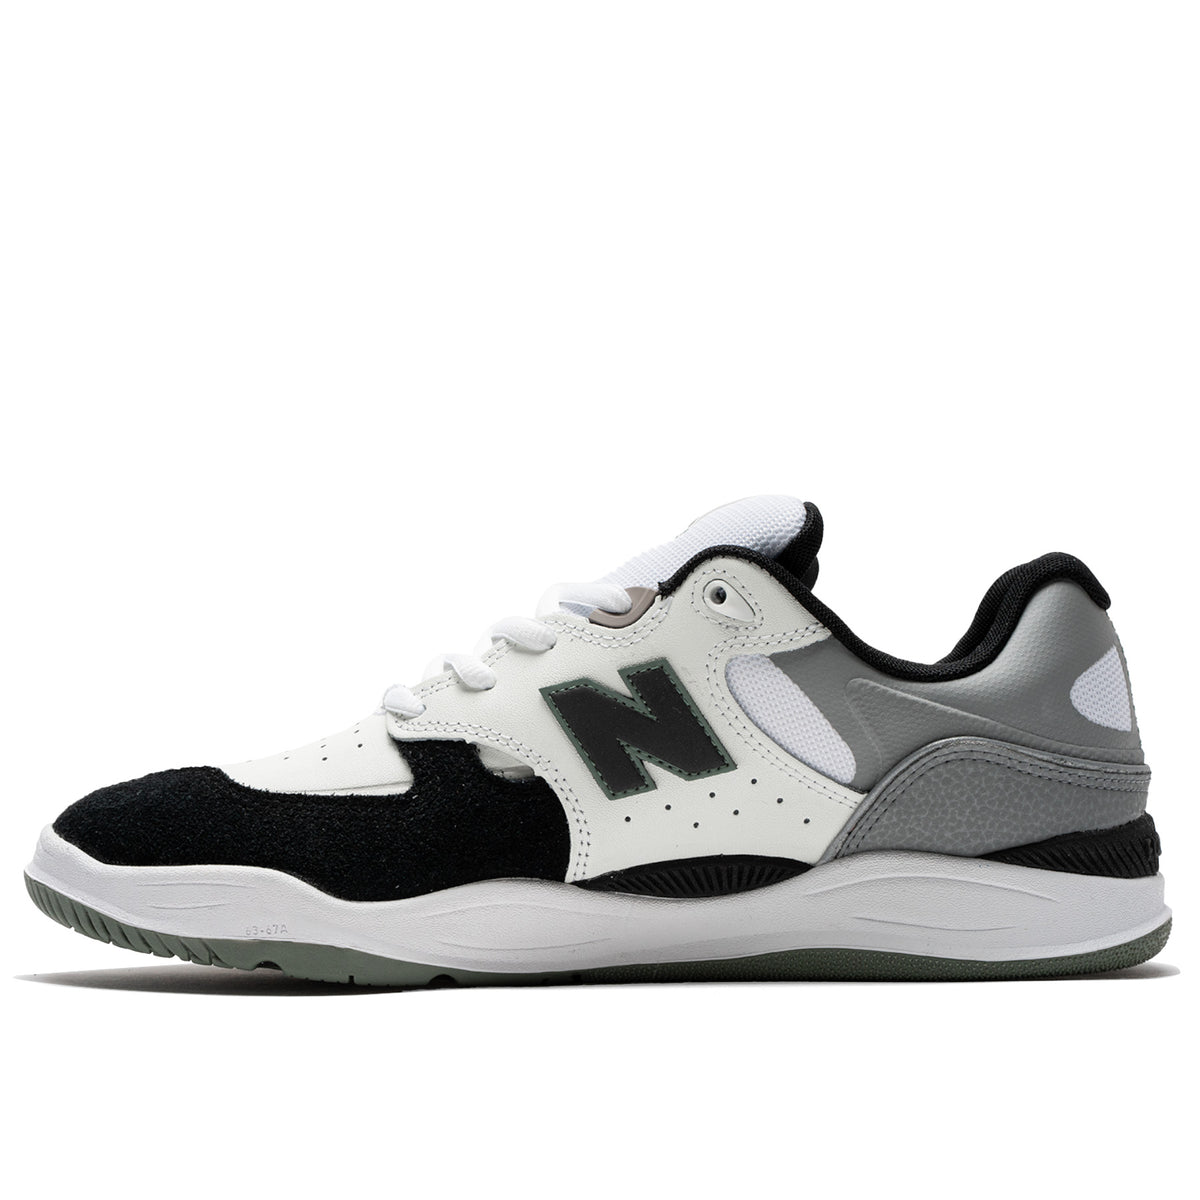 New Balance Numeric 1010 CL Black White and Gray